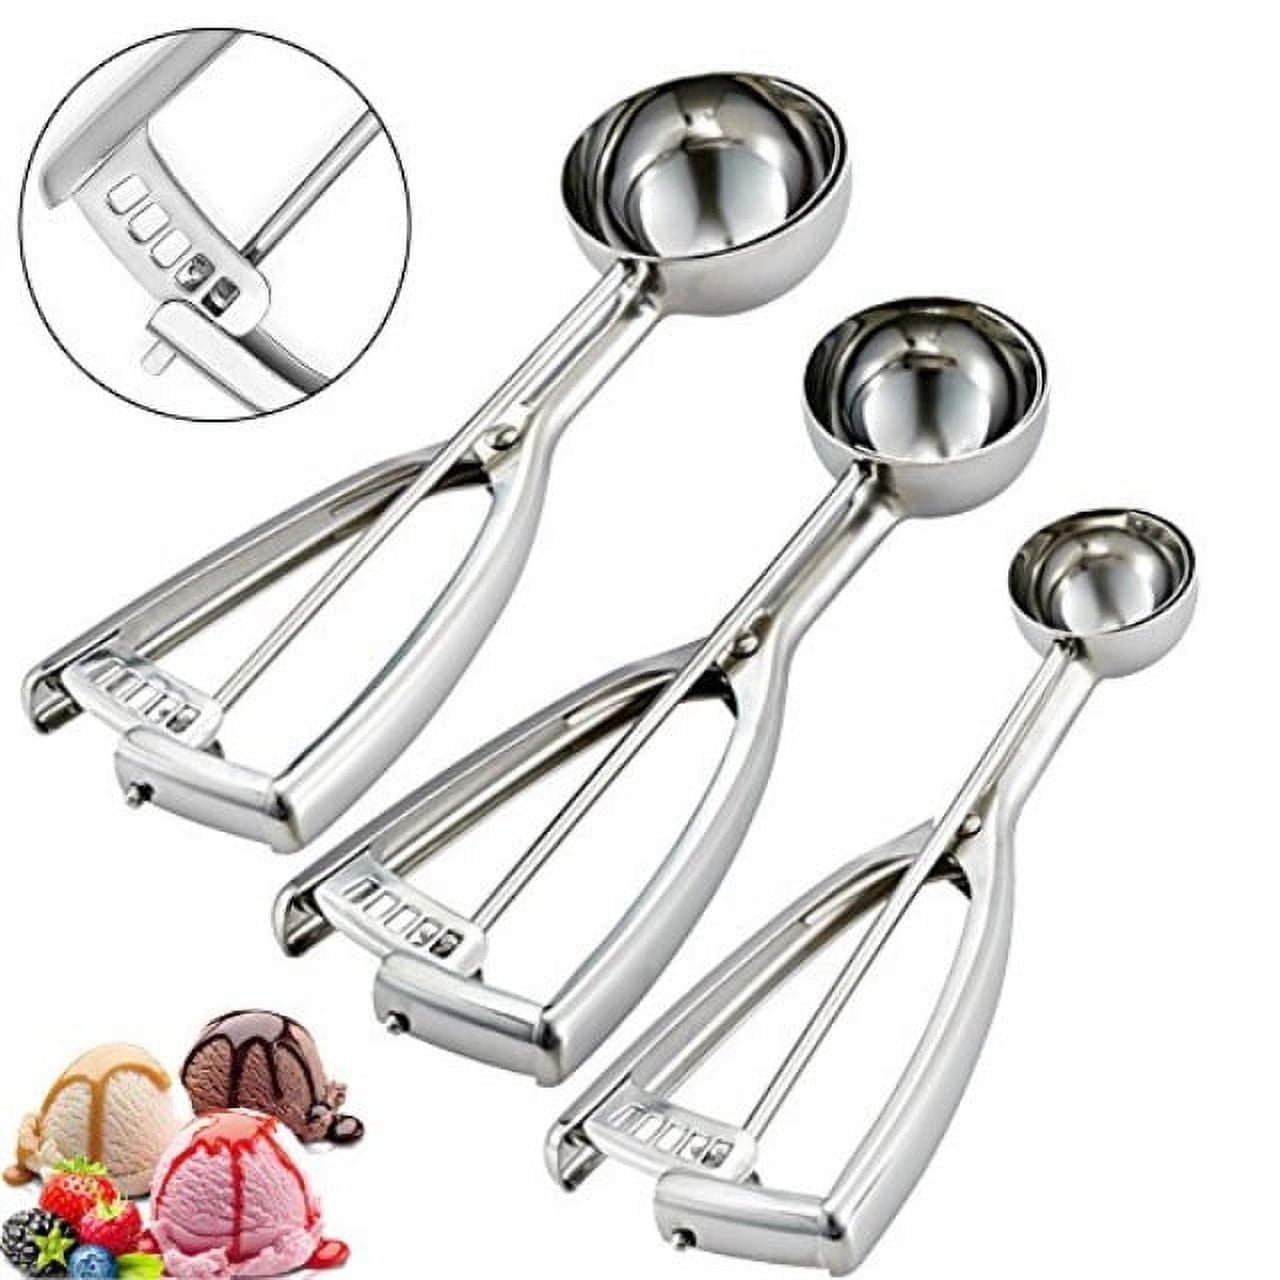 Wddeevoi 3 Pack Ice Cream Scoop Cookie Scoop Set Small/Medium/Large Ice Cream Scooper Cookie Scoops for Baking, Silver, S-M-L